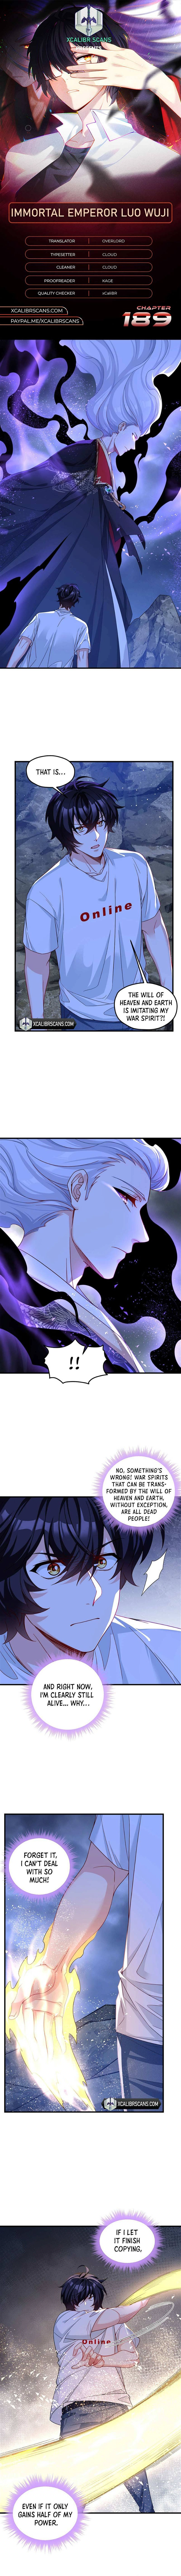 The Immortal Emperor Luo Wuji Has Returned Chapter 189 page 1 - MangaWeebs.in